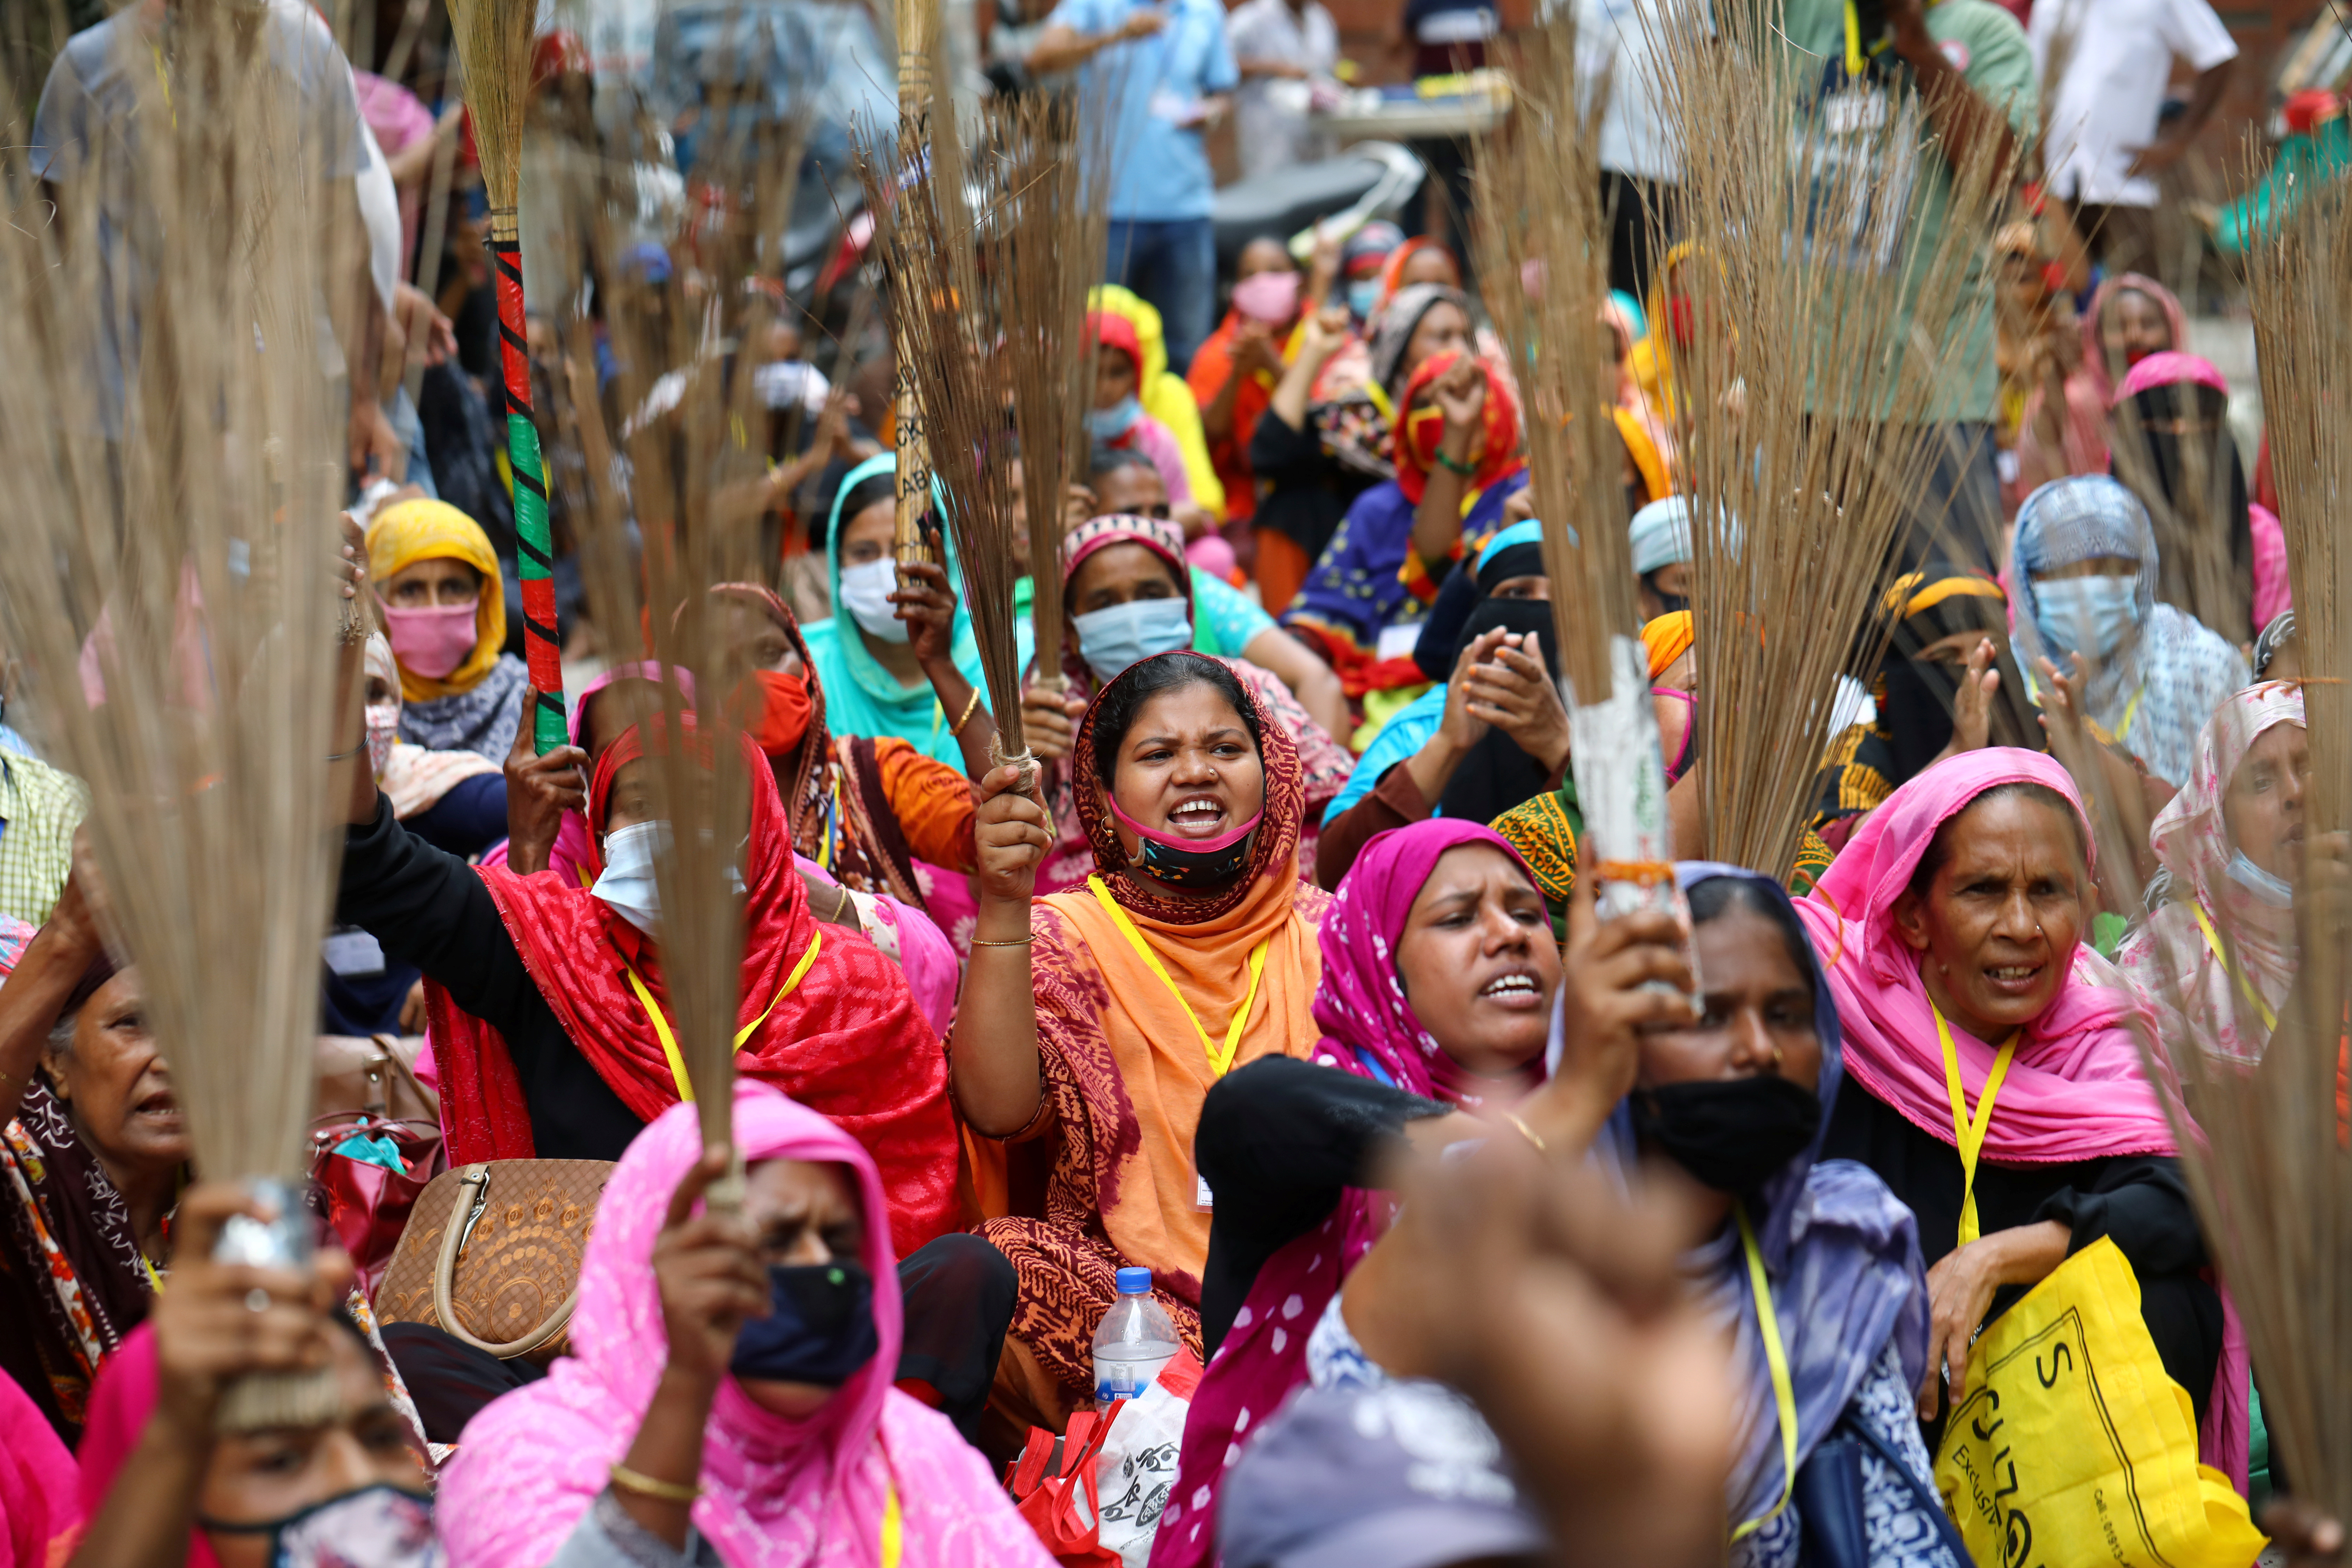 Garment workers shout slogans while holding brooms during a protest demanding their due wages in Dhaka